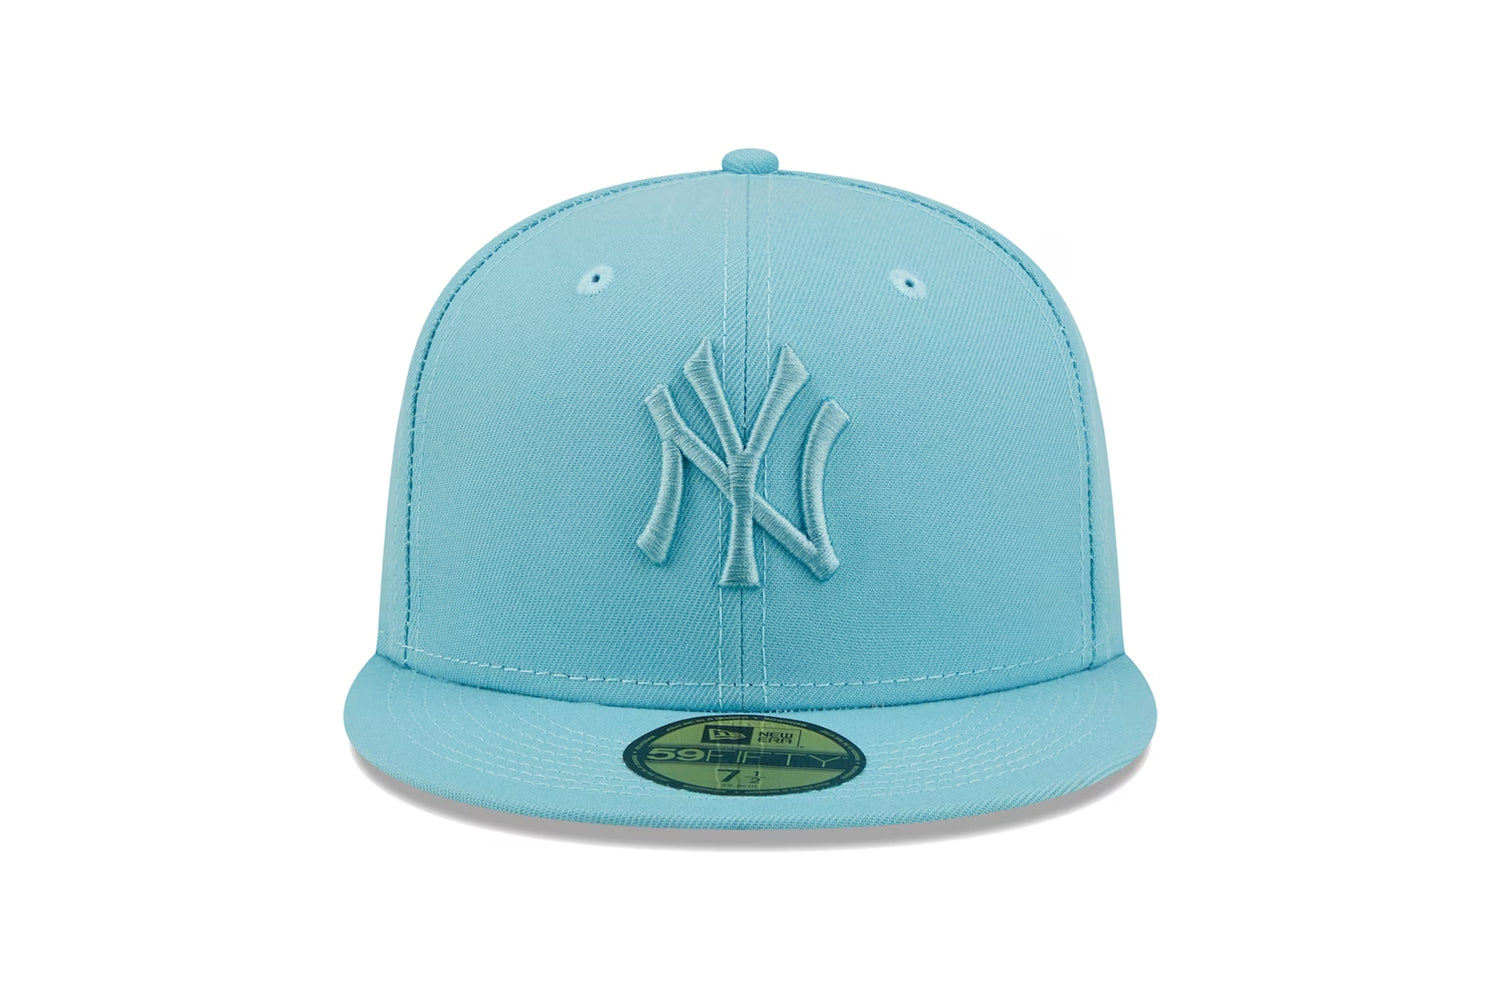 NEW ERA NEW YORK YANKEES COLOR PACK LIGHT BLUE 59FIFTY FITTED HAT